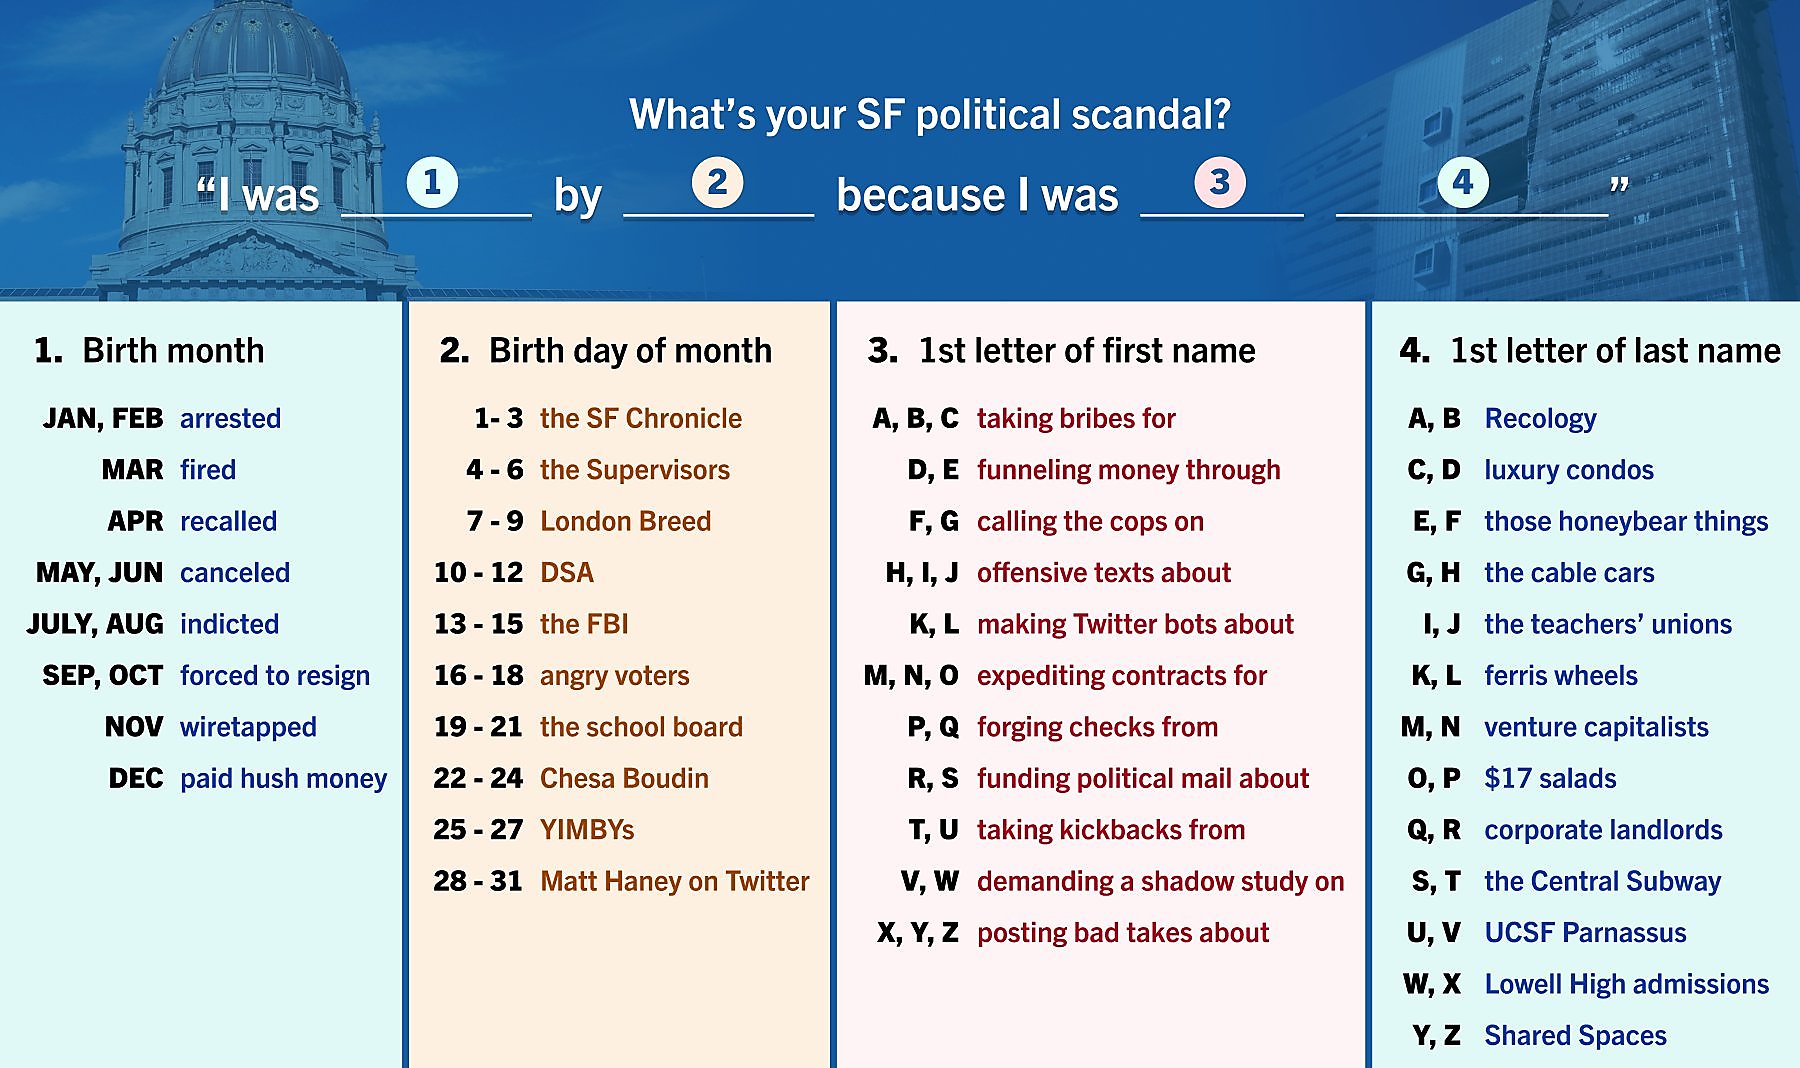 A meme about 'only-in-San Francisco' political scandals is tearing